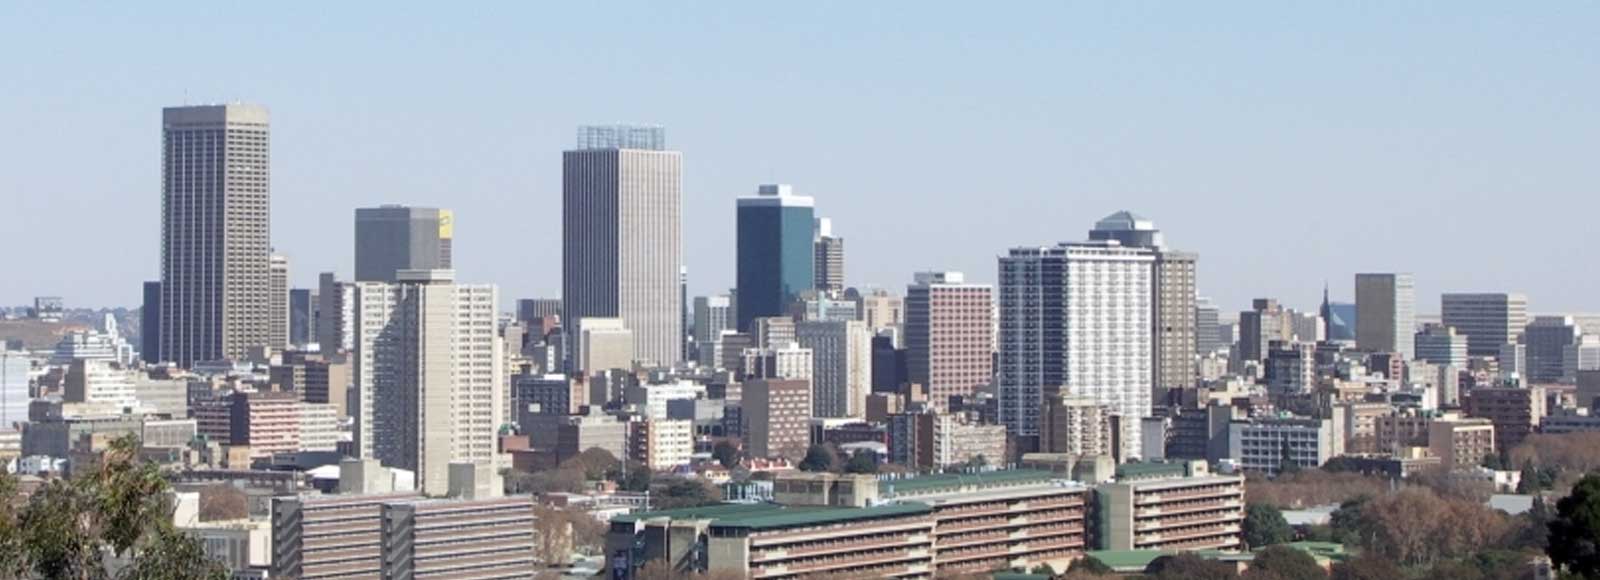 Transfer Offers in Johannesburg. Low Cost Transfers in  Johannesburg 